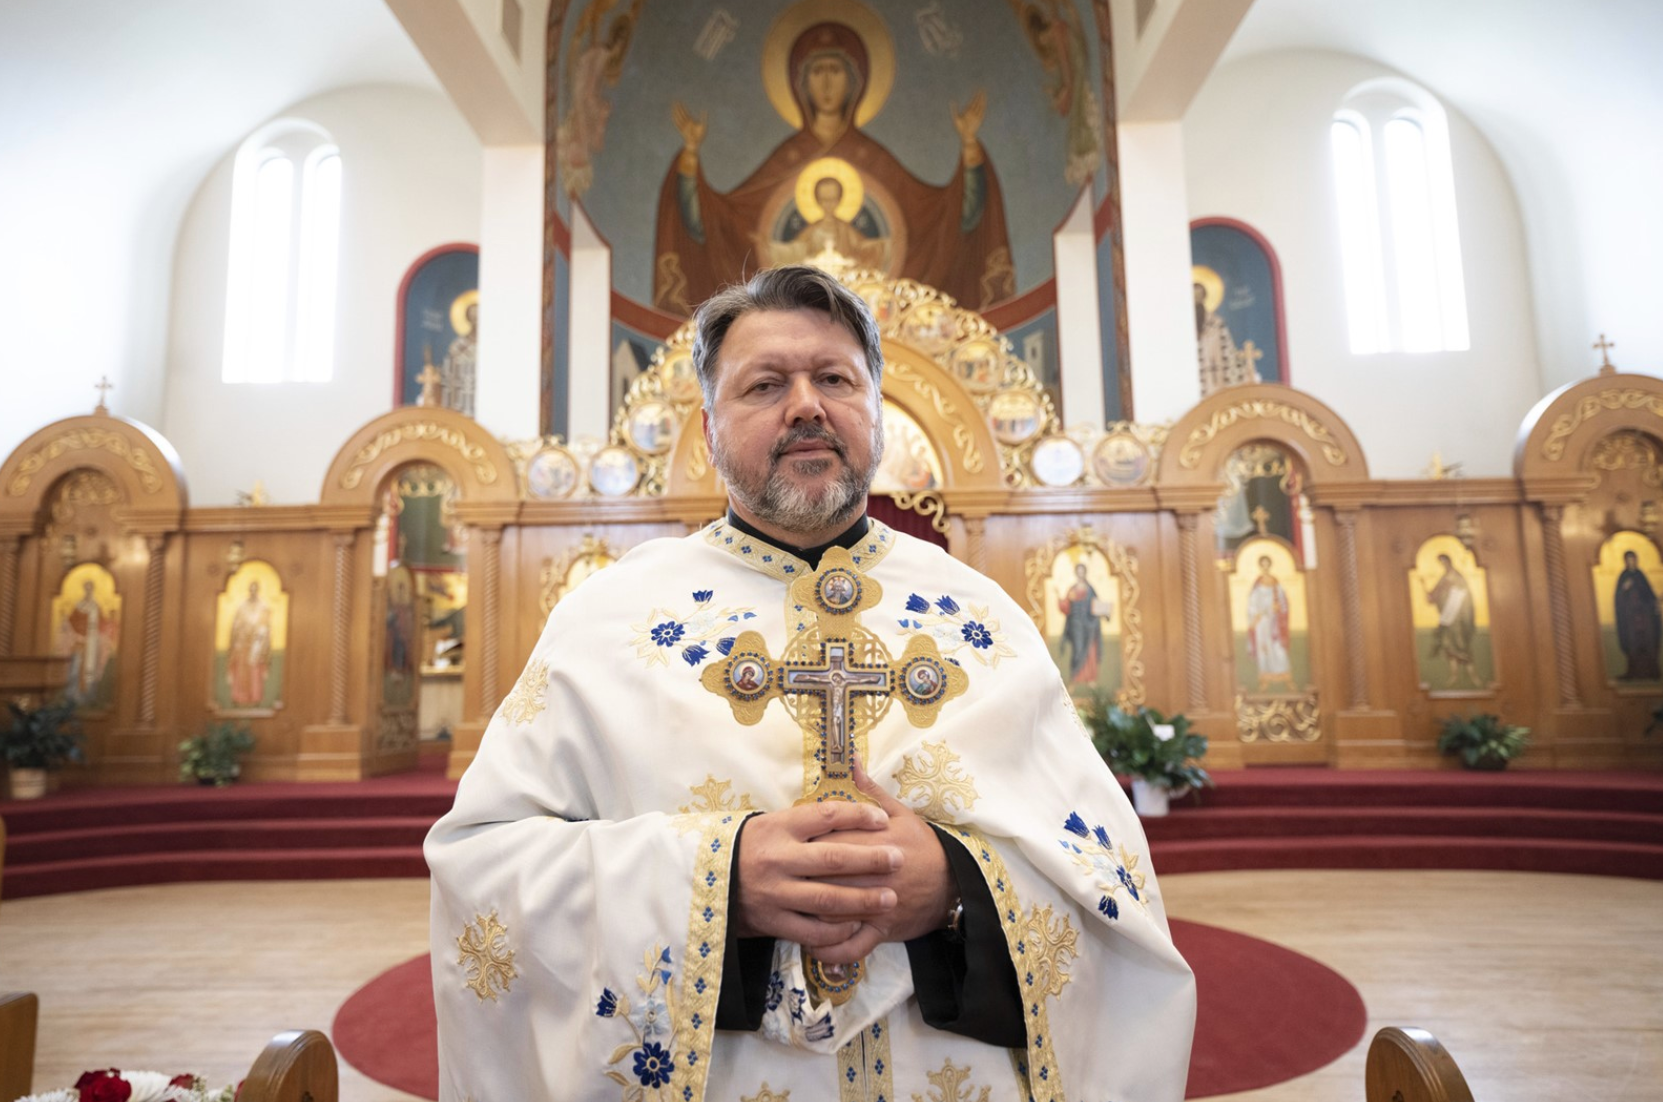 Post-Tribune Easter article features Father Marko and holiday message